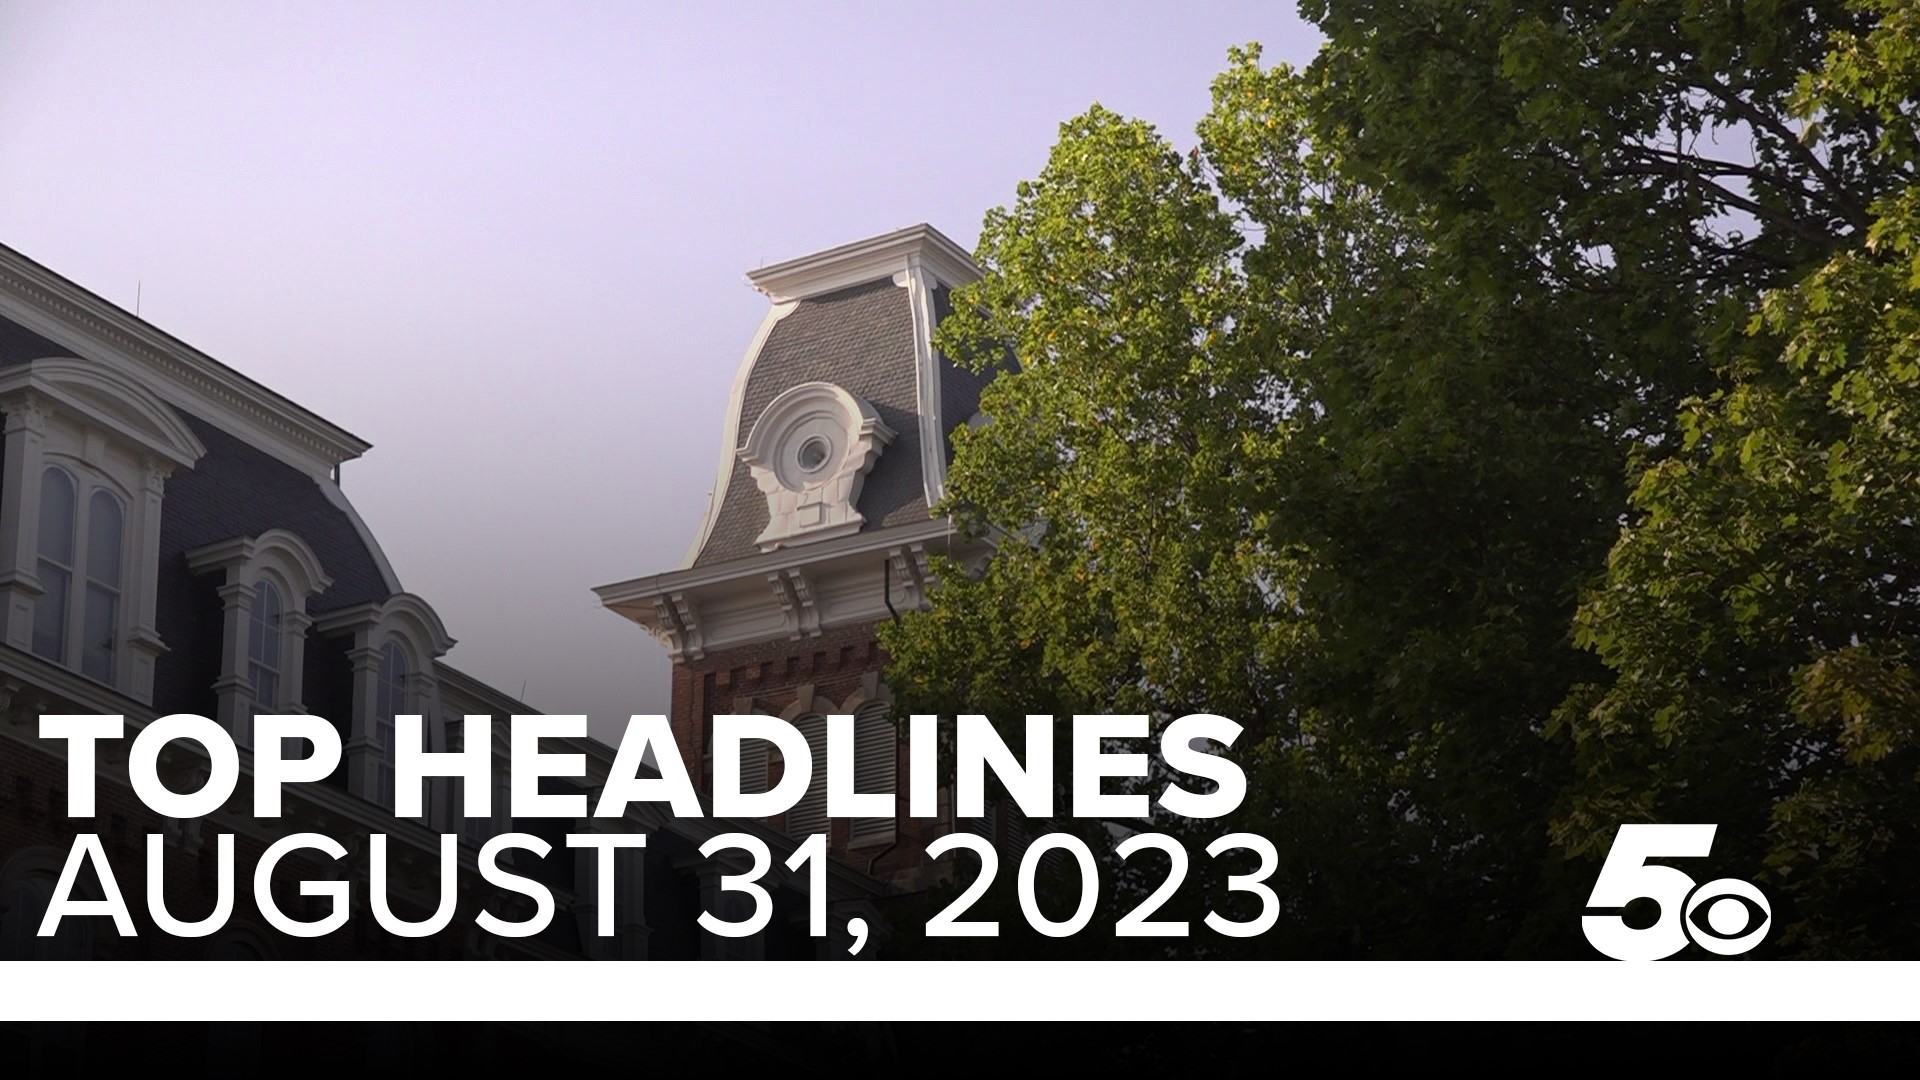 Top headlines for Northwest Arkansas and the River Valley for August 31, 2023.